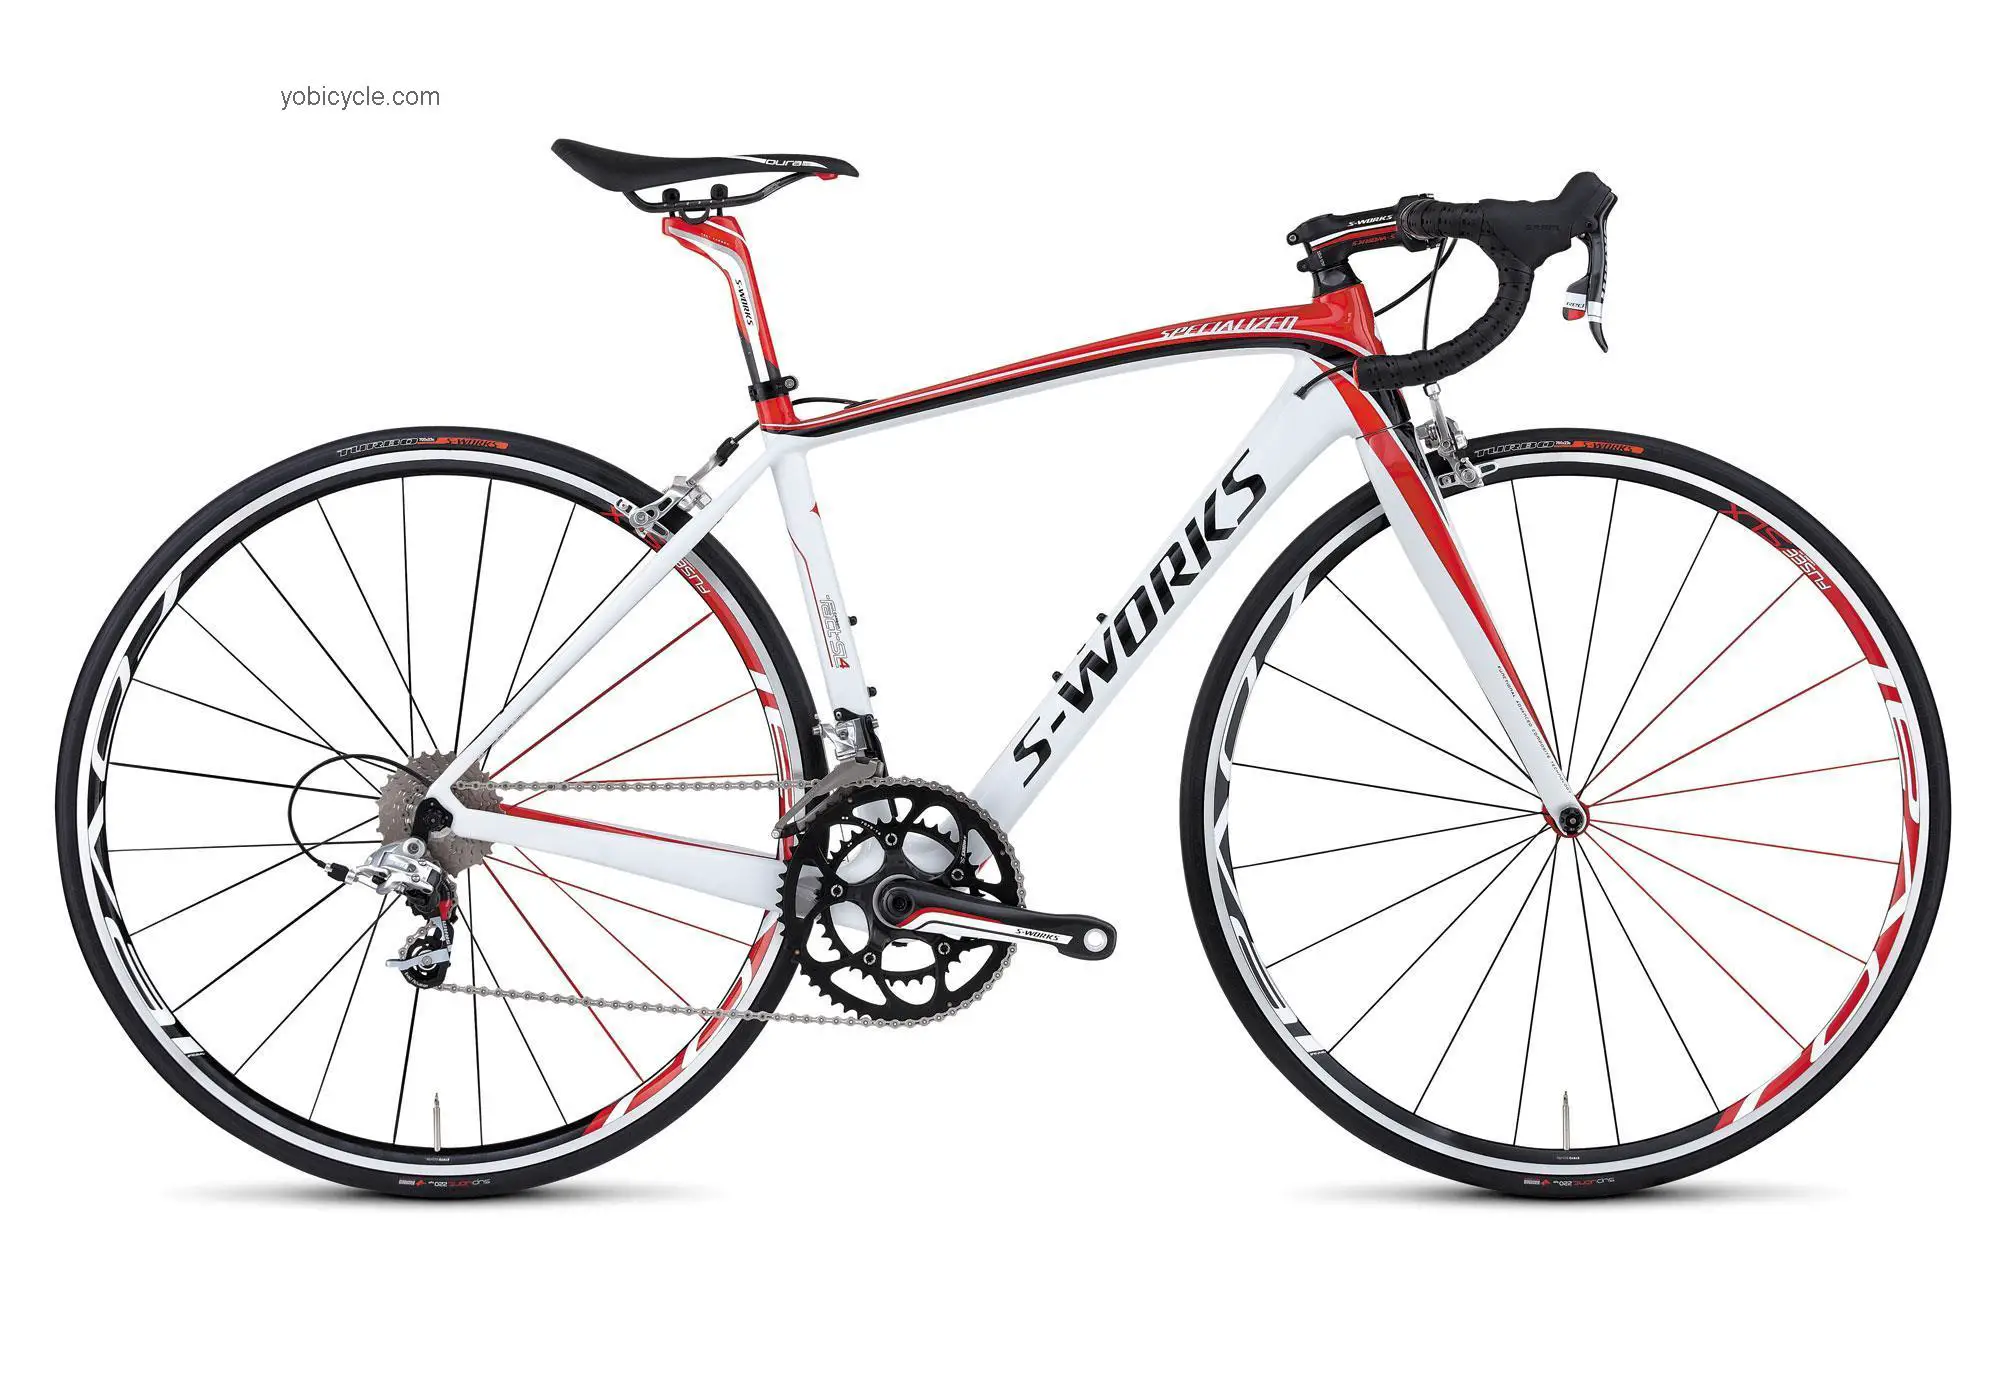 Specialized S-Works Amira SL4 M2 2012 comparison online with competitors